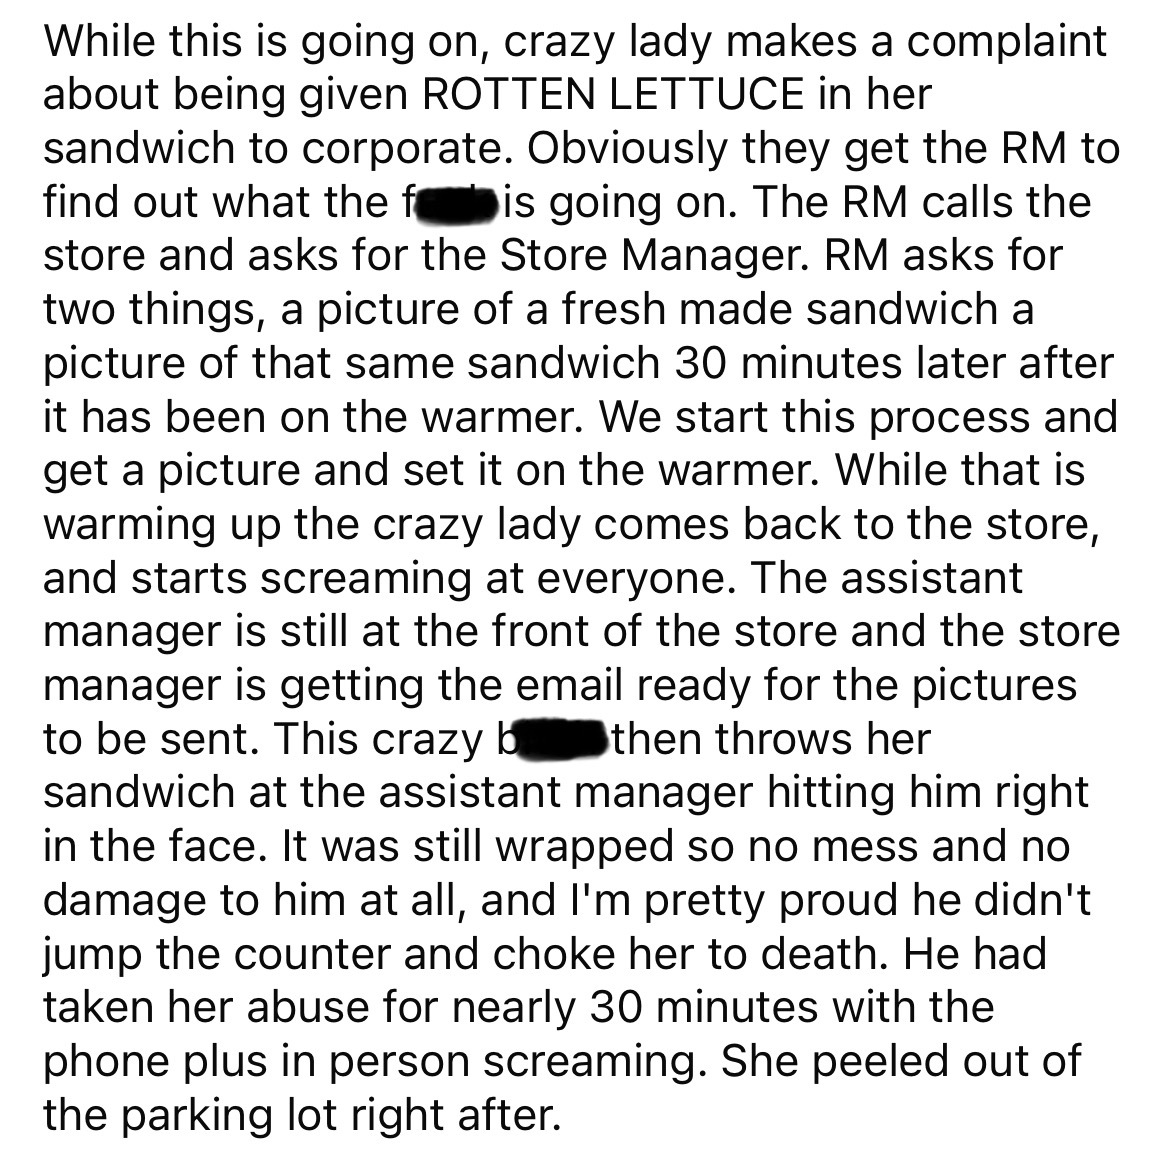 number - While this is going on, crazy lady makes a complaint about being given Rotten Lettuce in her sandwich to corporate. Obviously they get the Rm to find out what the f is going on. The Rm calls the store and asks for the Store Manager. Rm asks for t